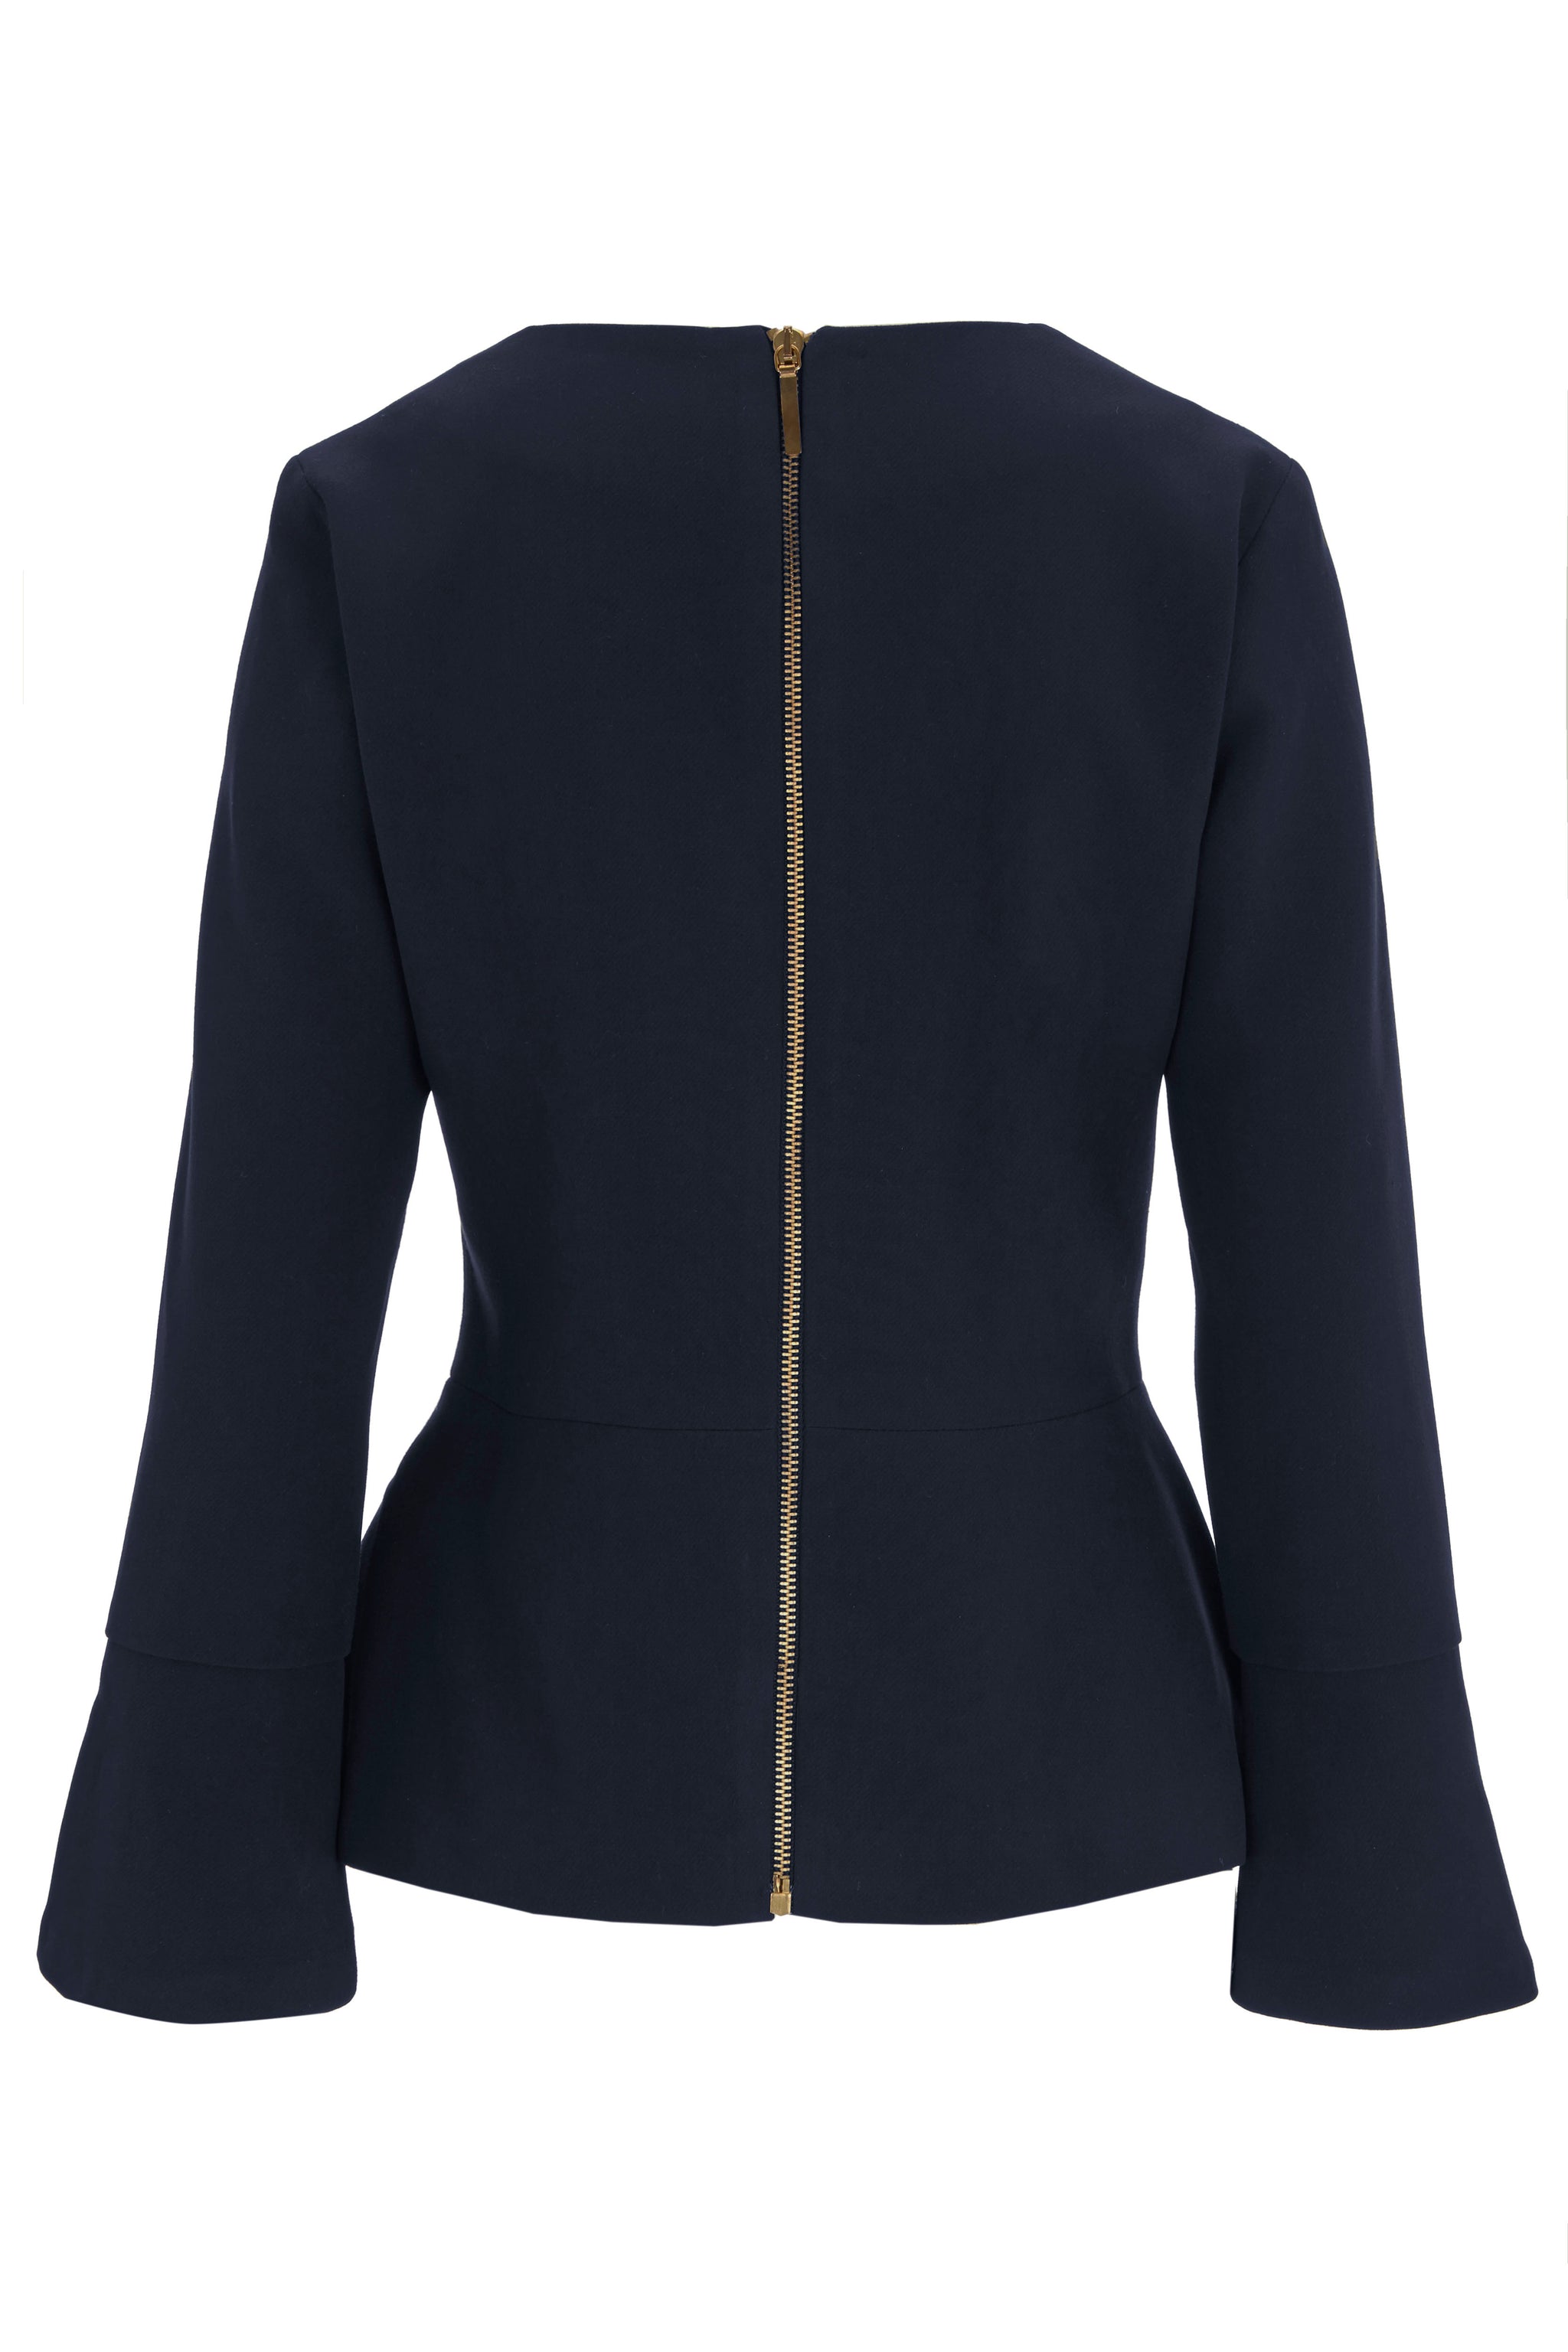 Chartwell Navy Performance Tailoring Top